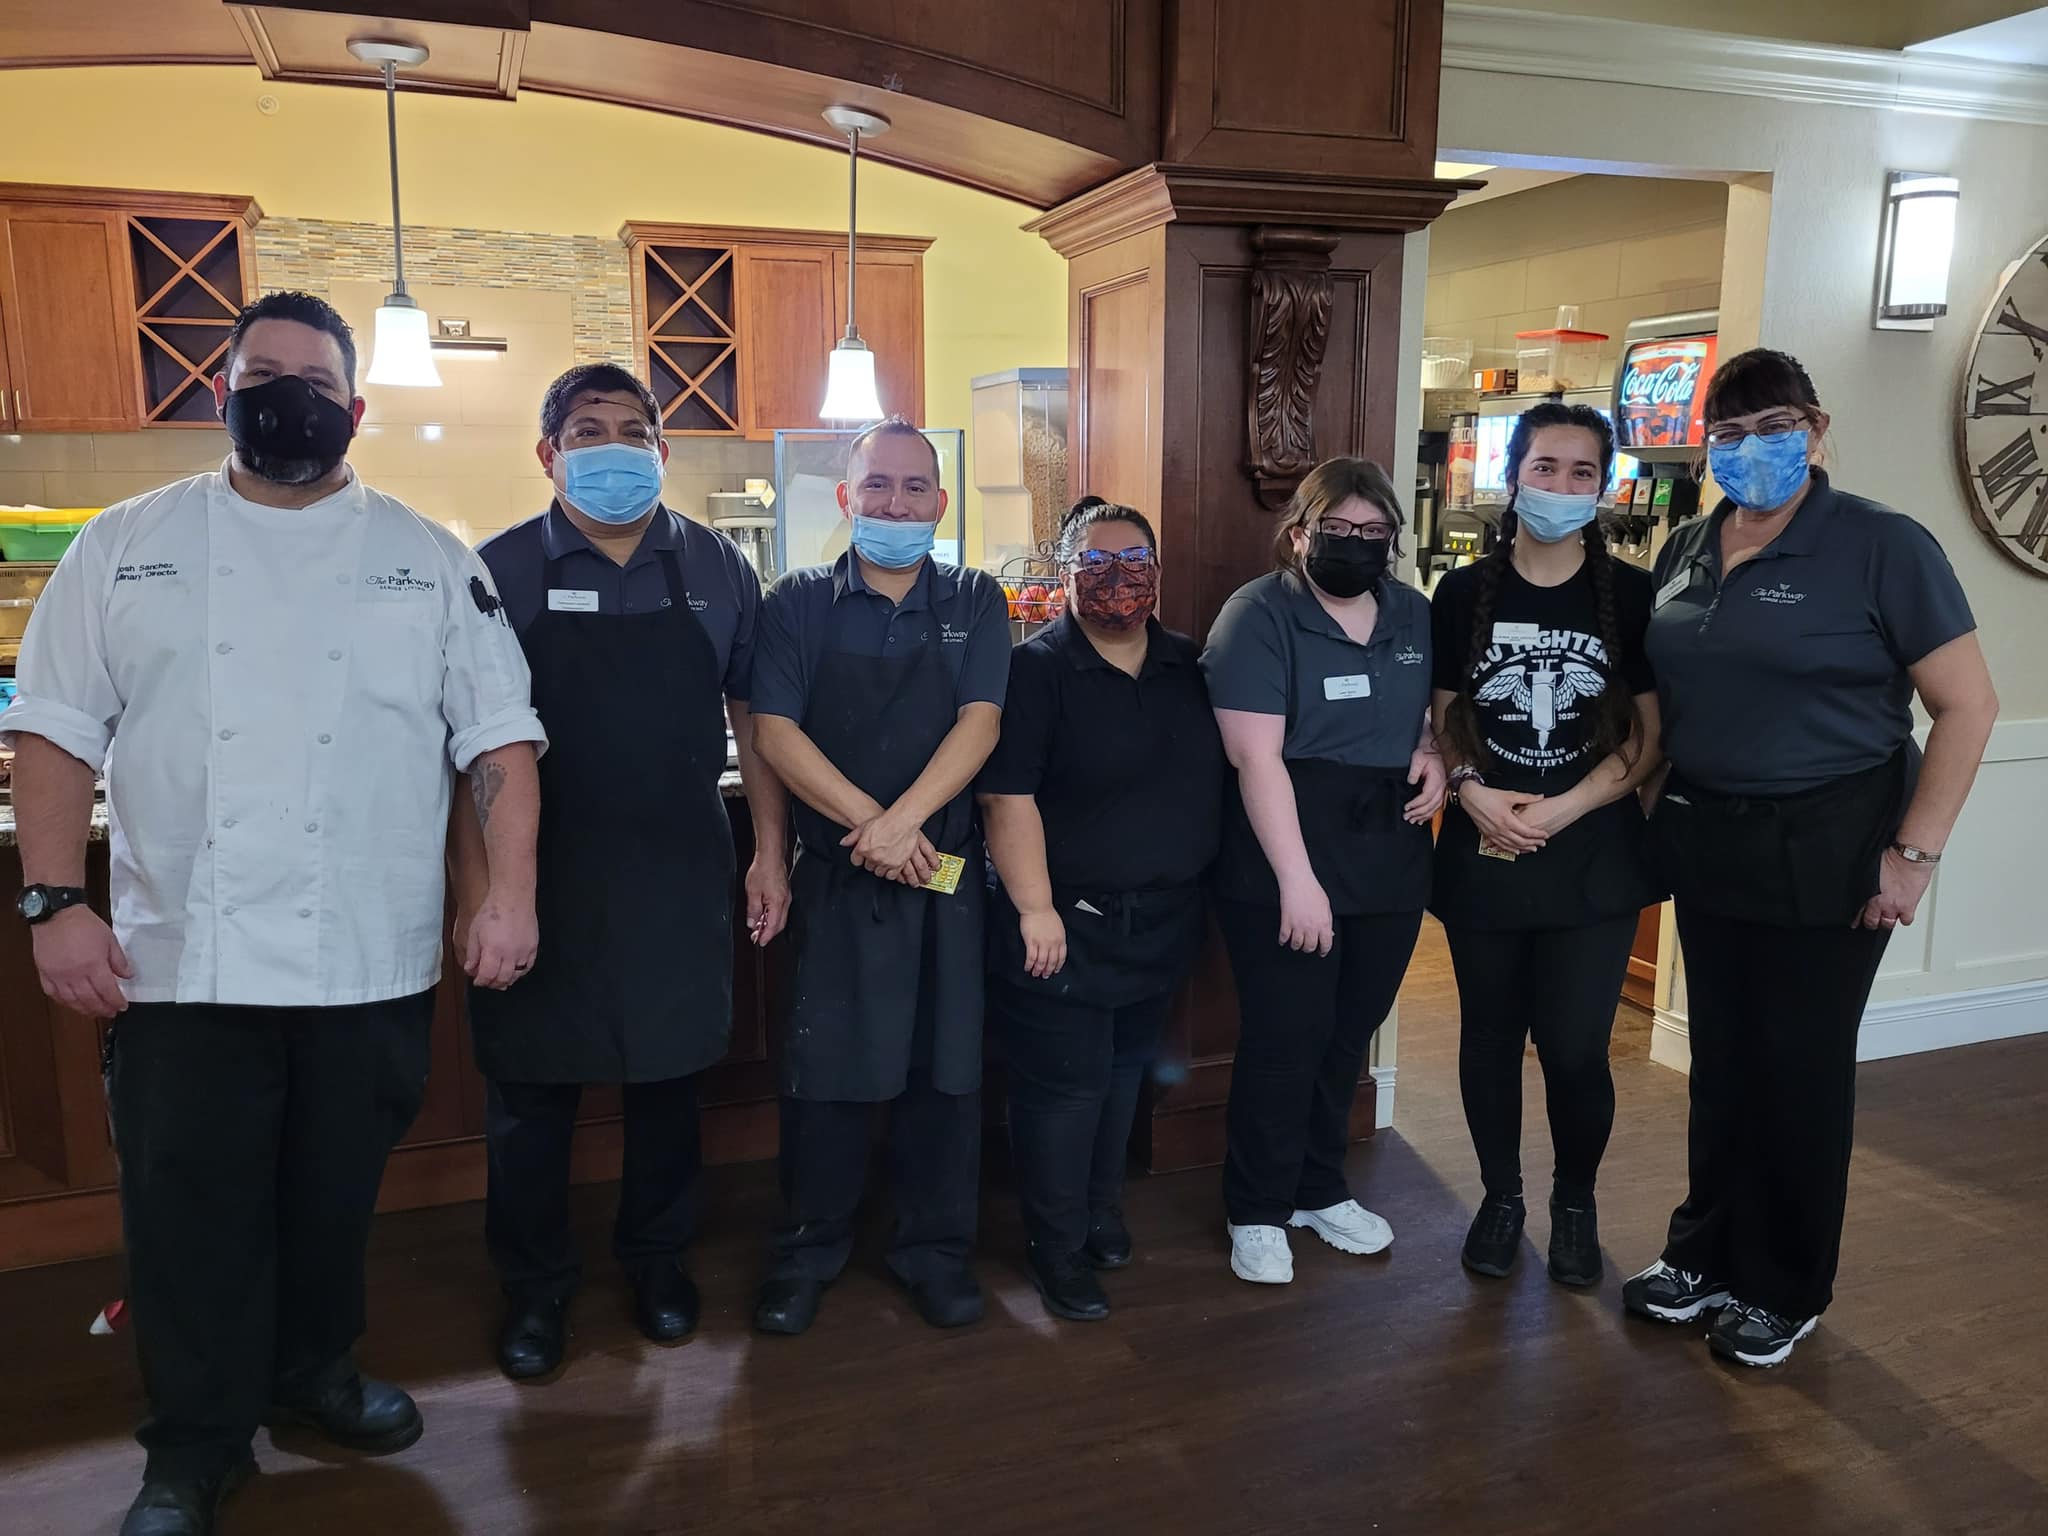 Team at The Parkway Senior Living in Blue Springs, MO